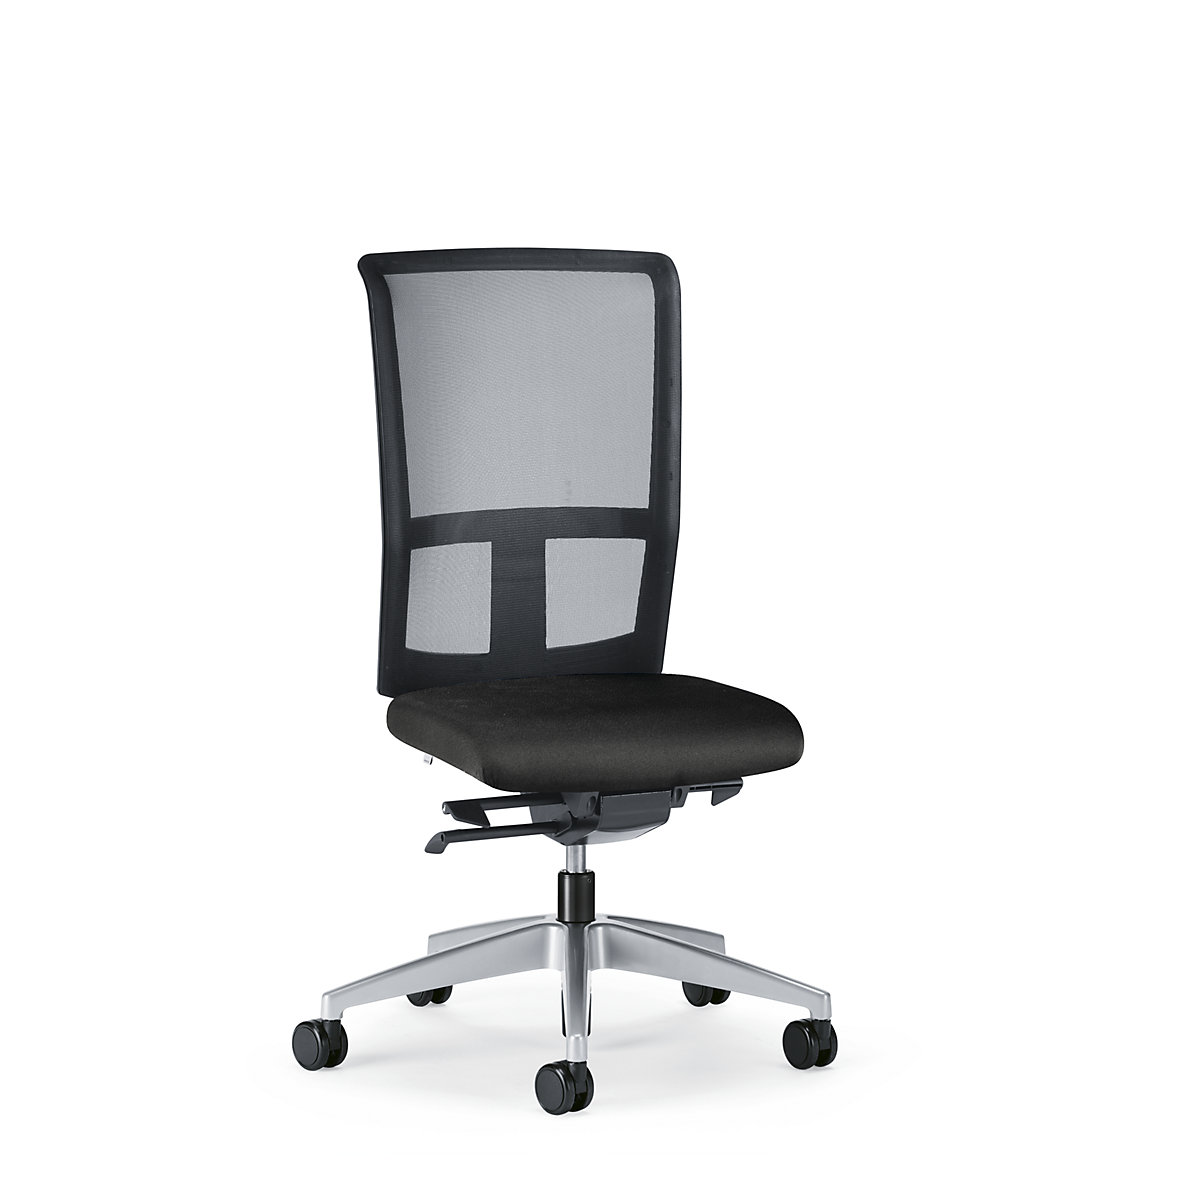 GOAL AIR office swivel chair, back rest height 545 mm – interstuhl, brilliant silver frame, with soft castors, graphite black, seat depth 410 mm-2